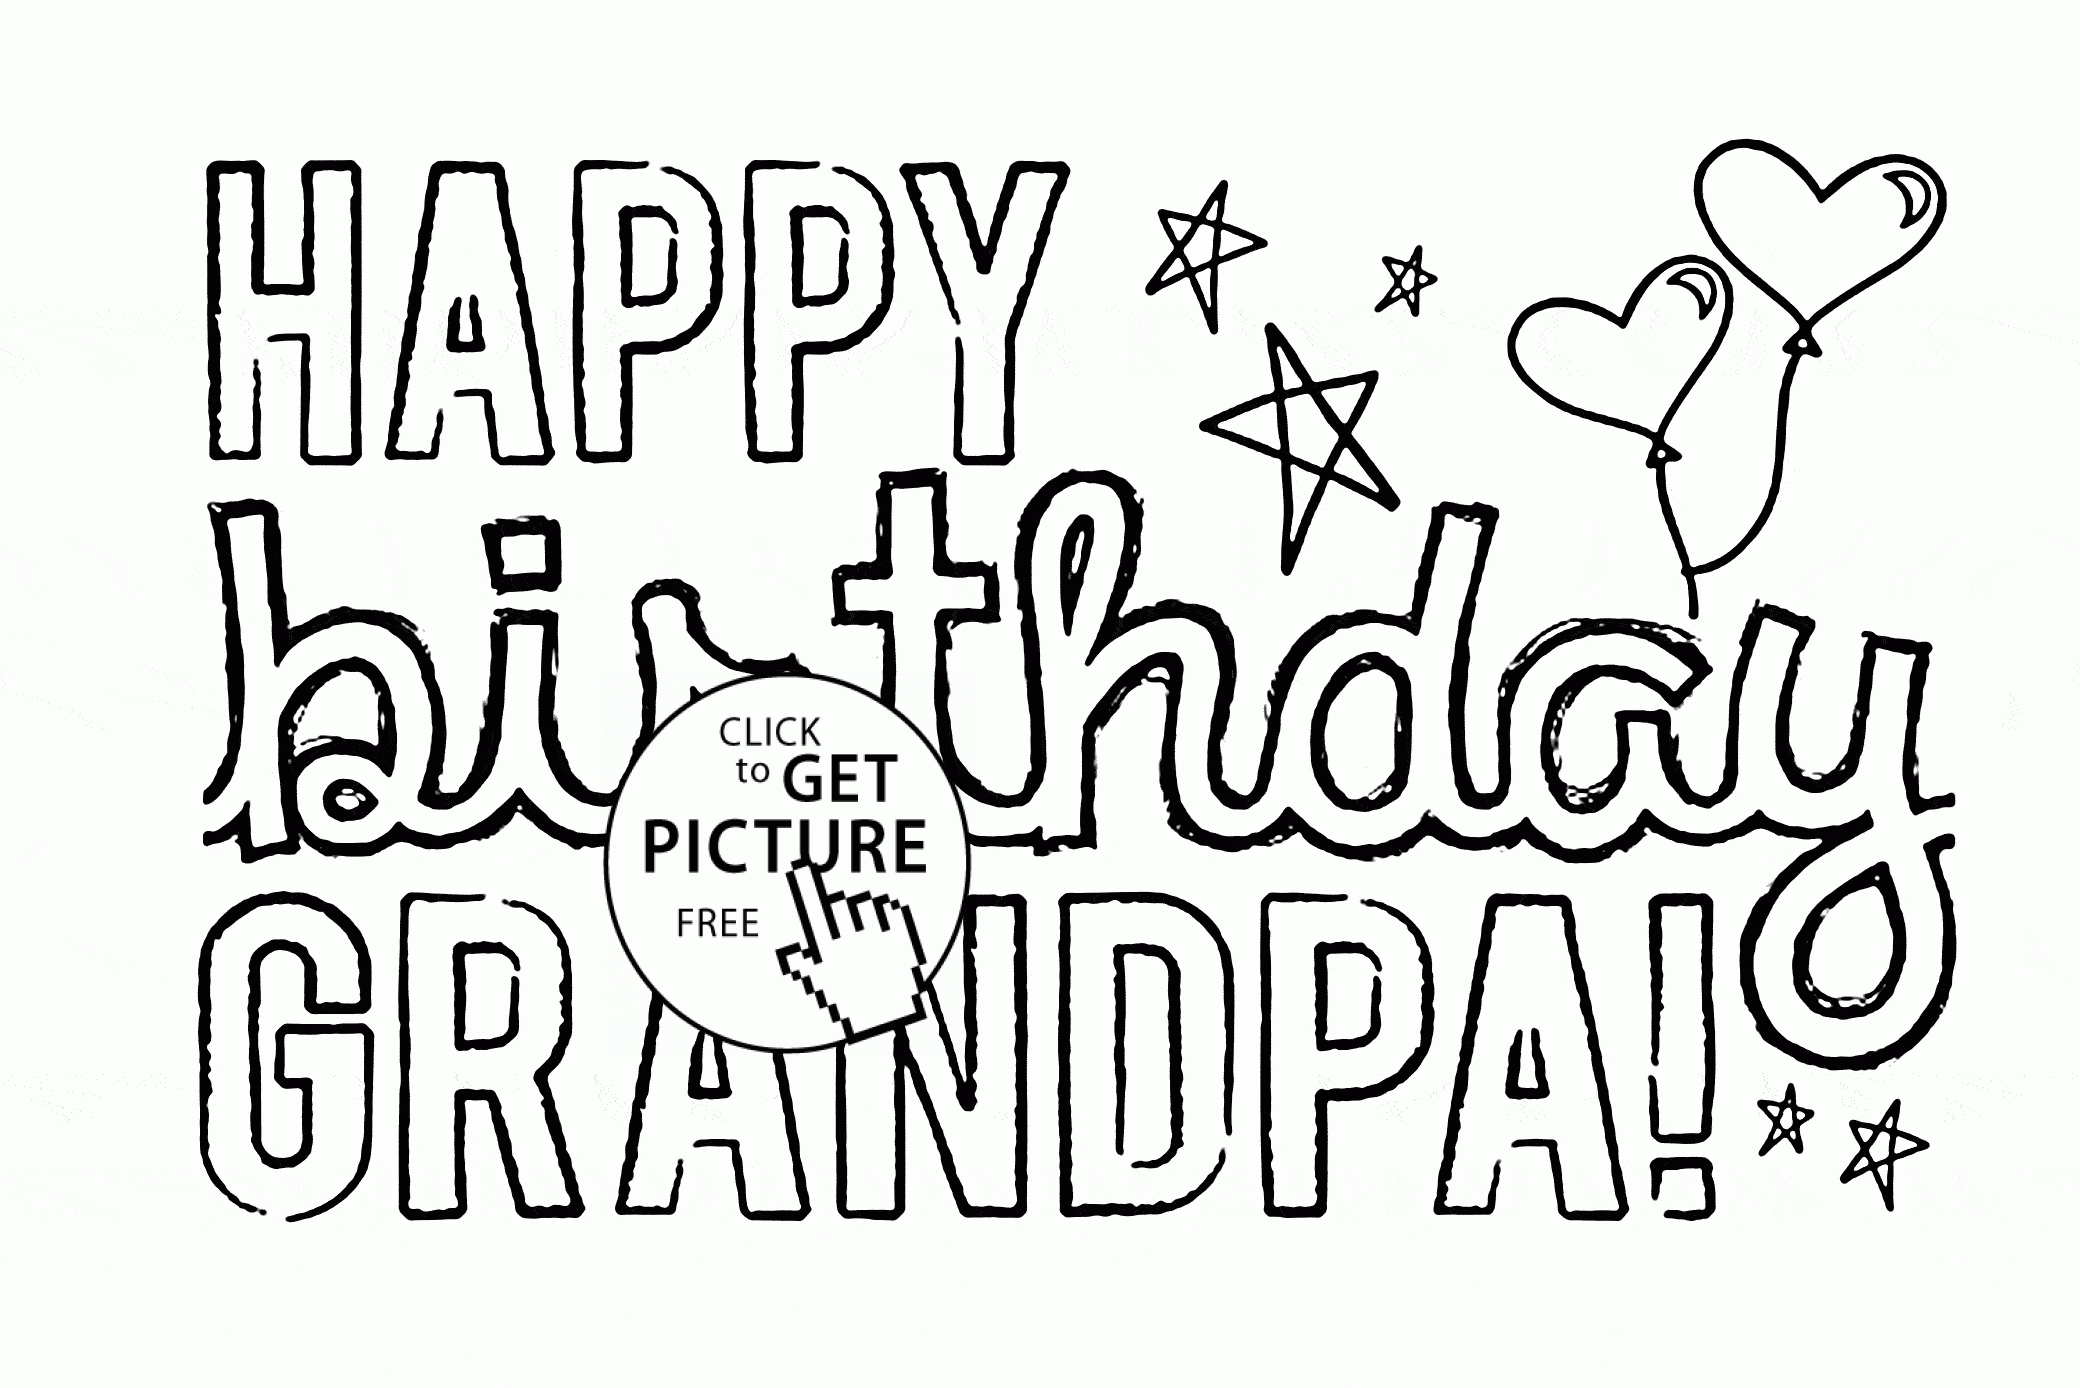 Happy Birthday Grandpa Coloring Page For Kids, Holiday Coloring - Free Printable Happy Birthday Cards For Dad